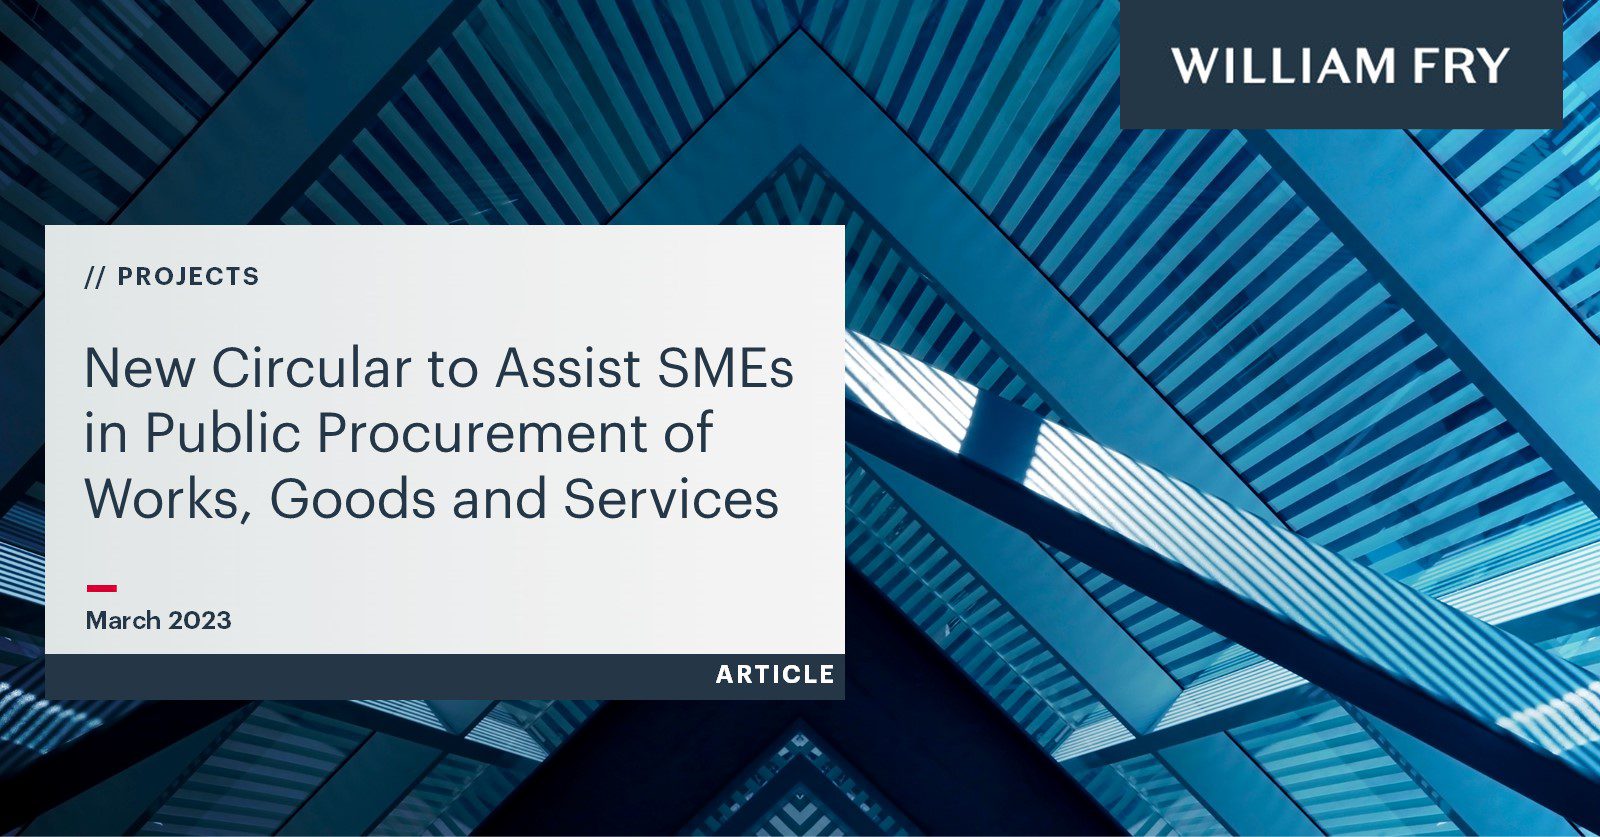 New Circular to Assist SMEs in Public Procurement of Works, Goods and Services